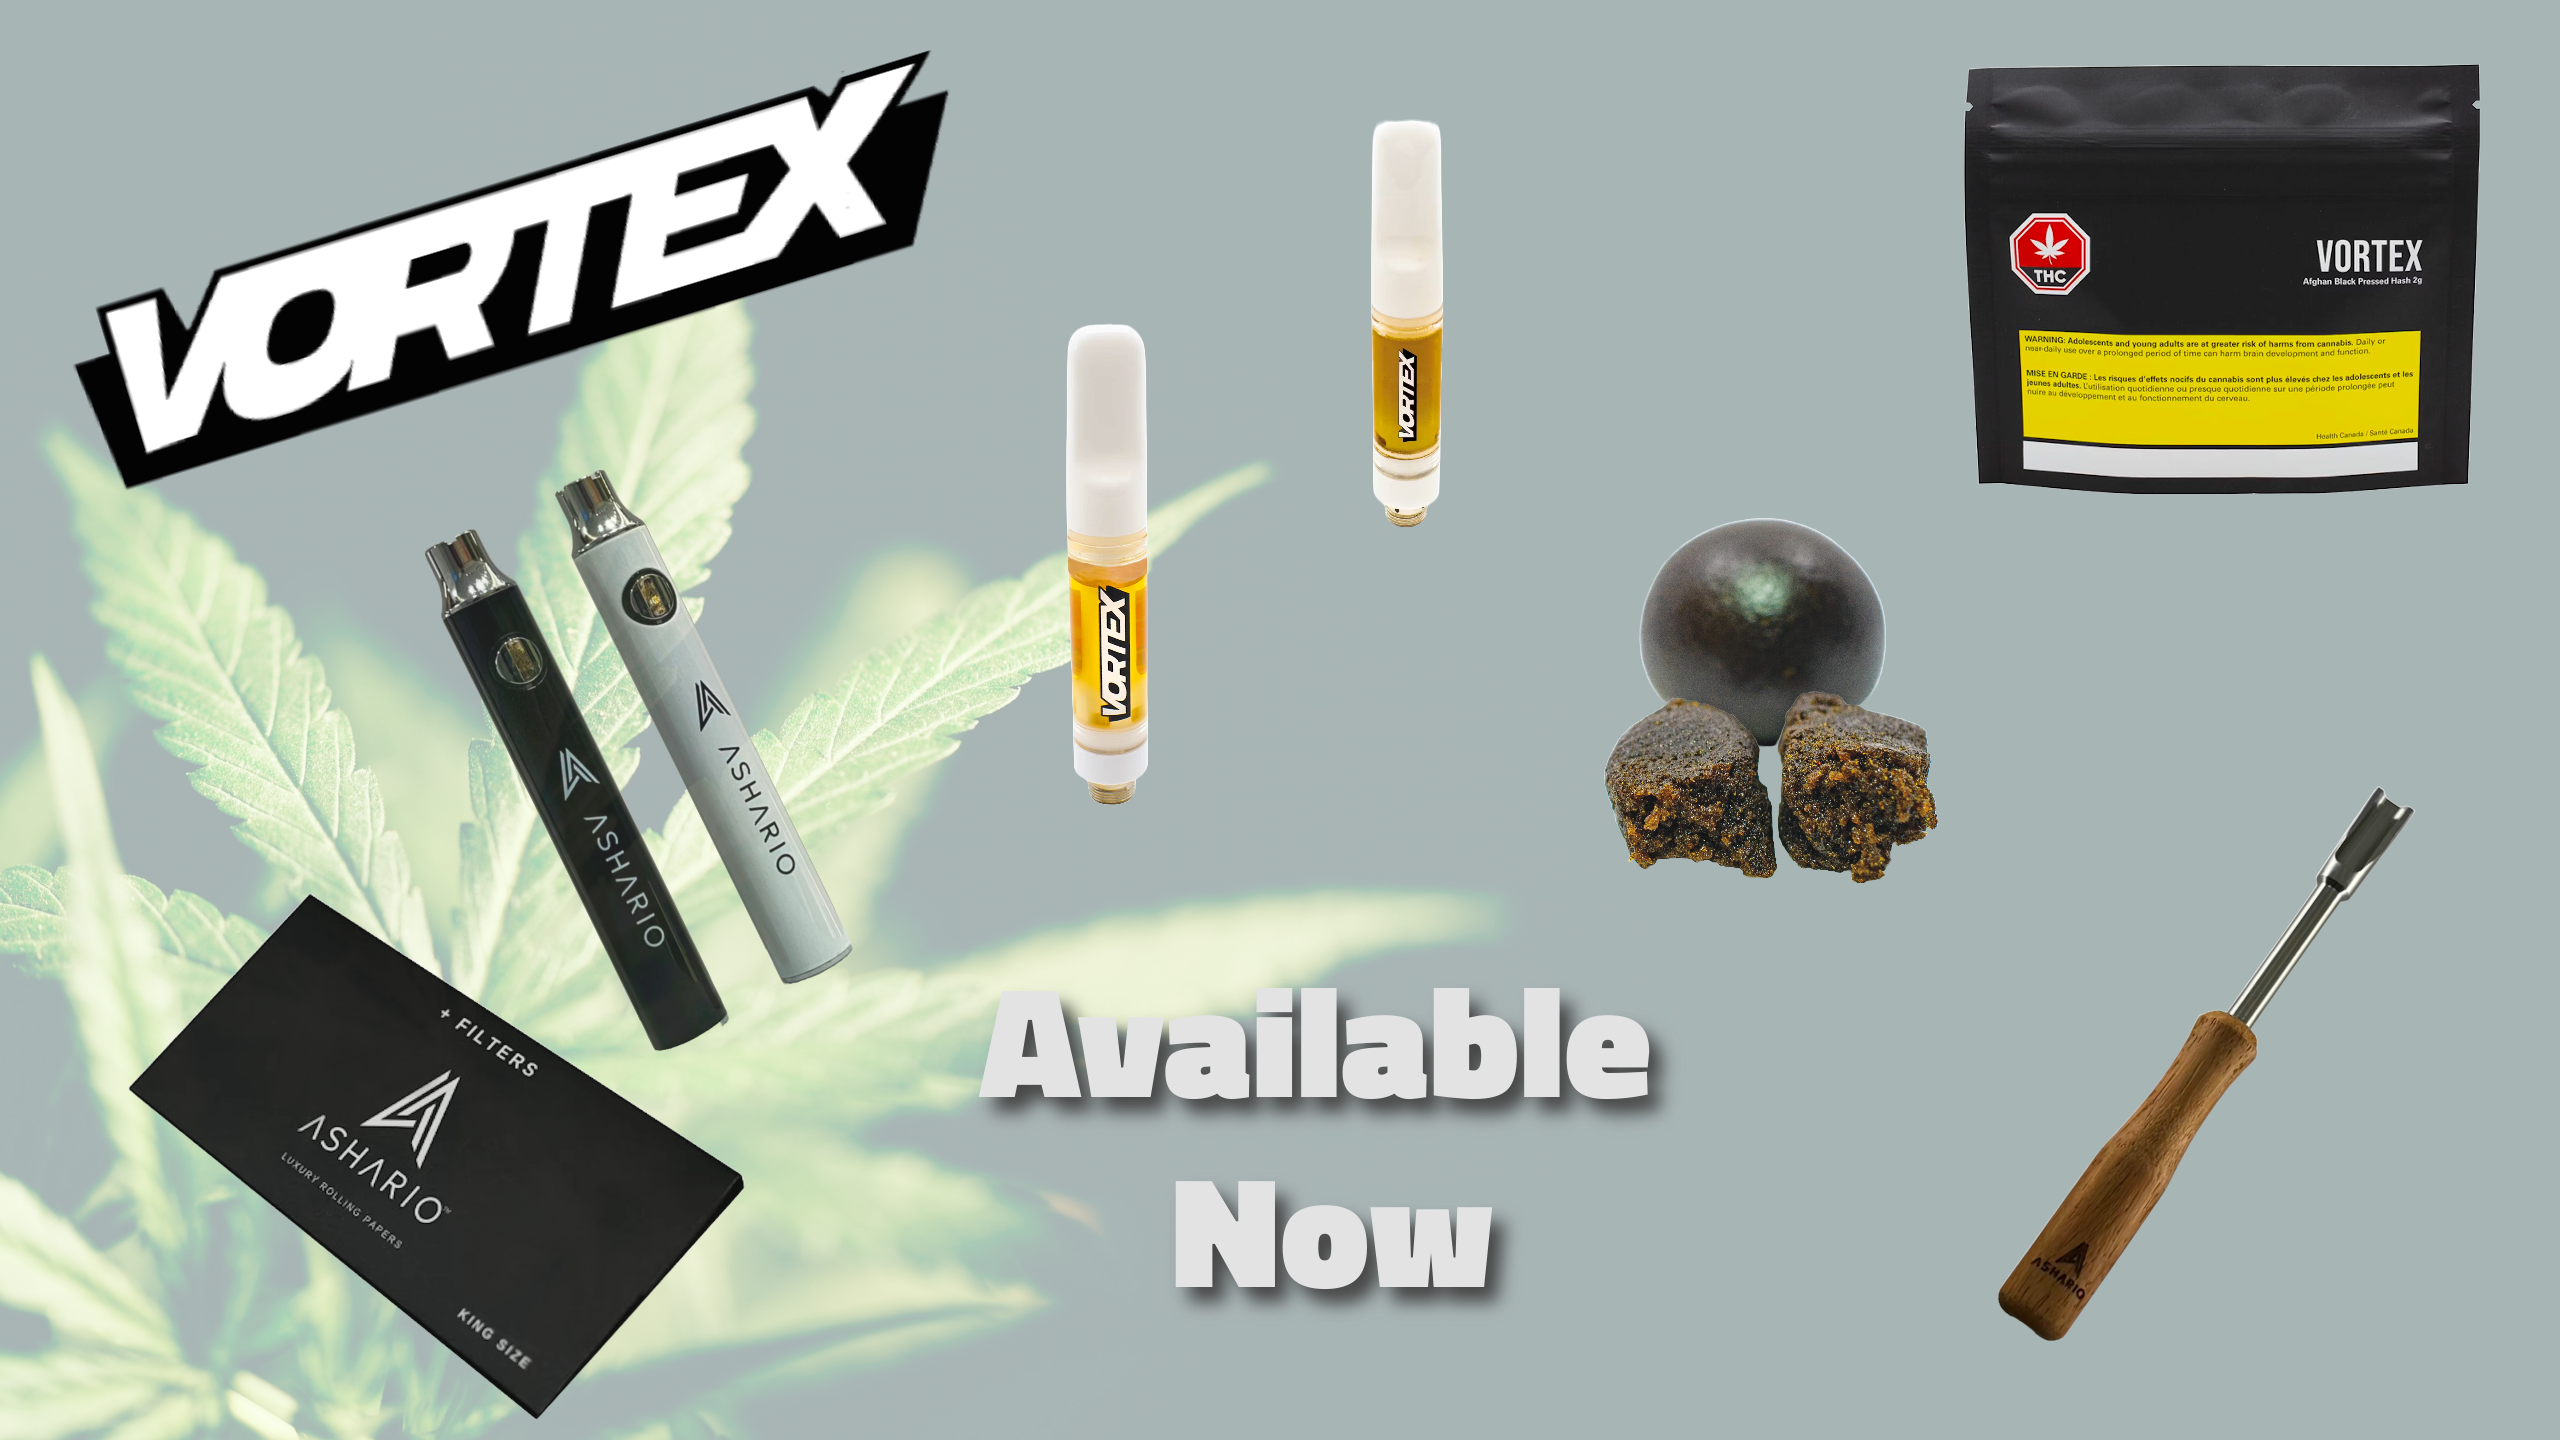 Experience the whirlwind of flavor and potency with Vortex, a brand renowned for its dynamic cannabis offerings, now available at Ashario Cannabis.